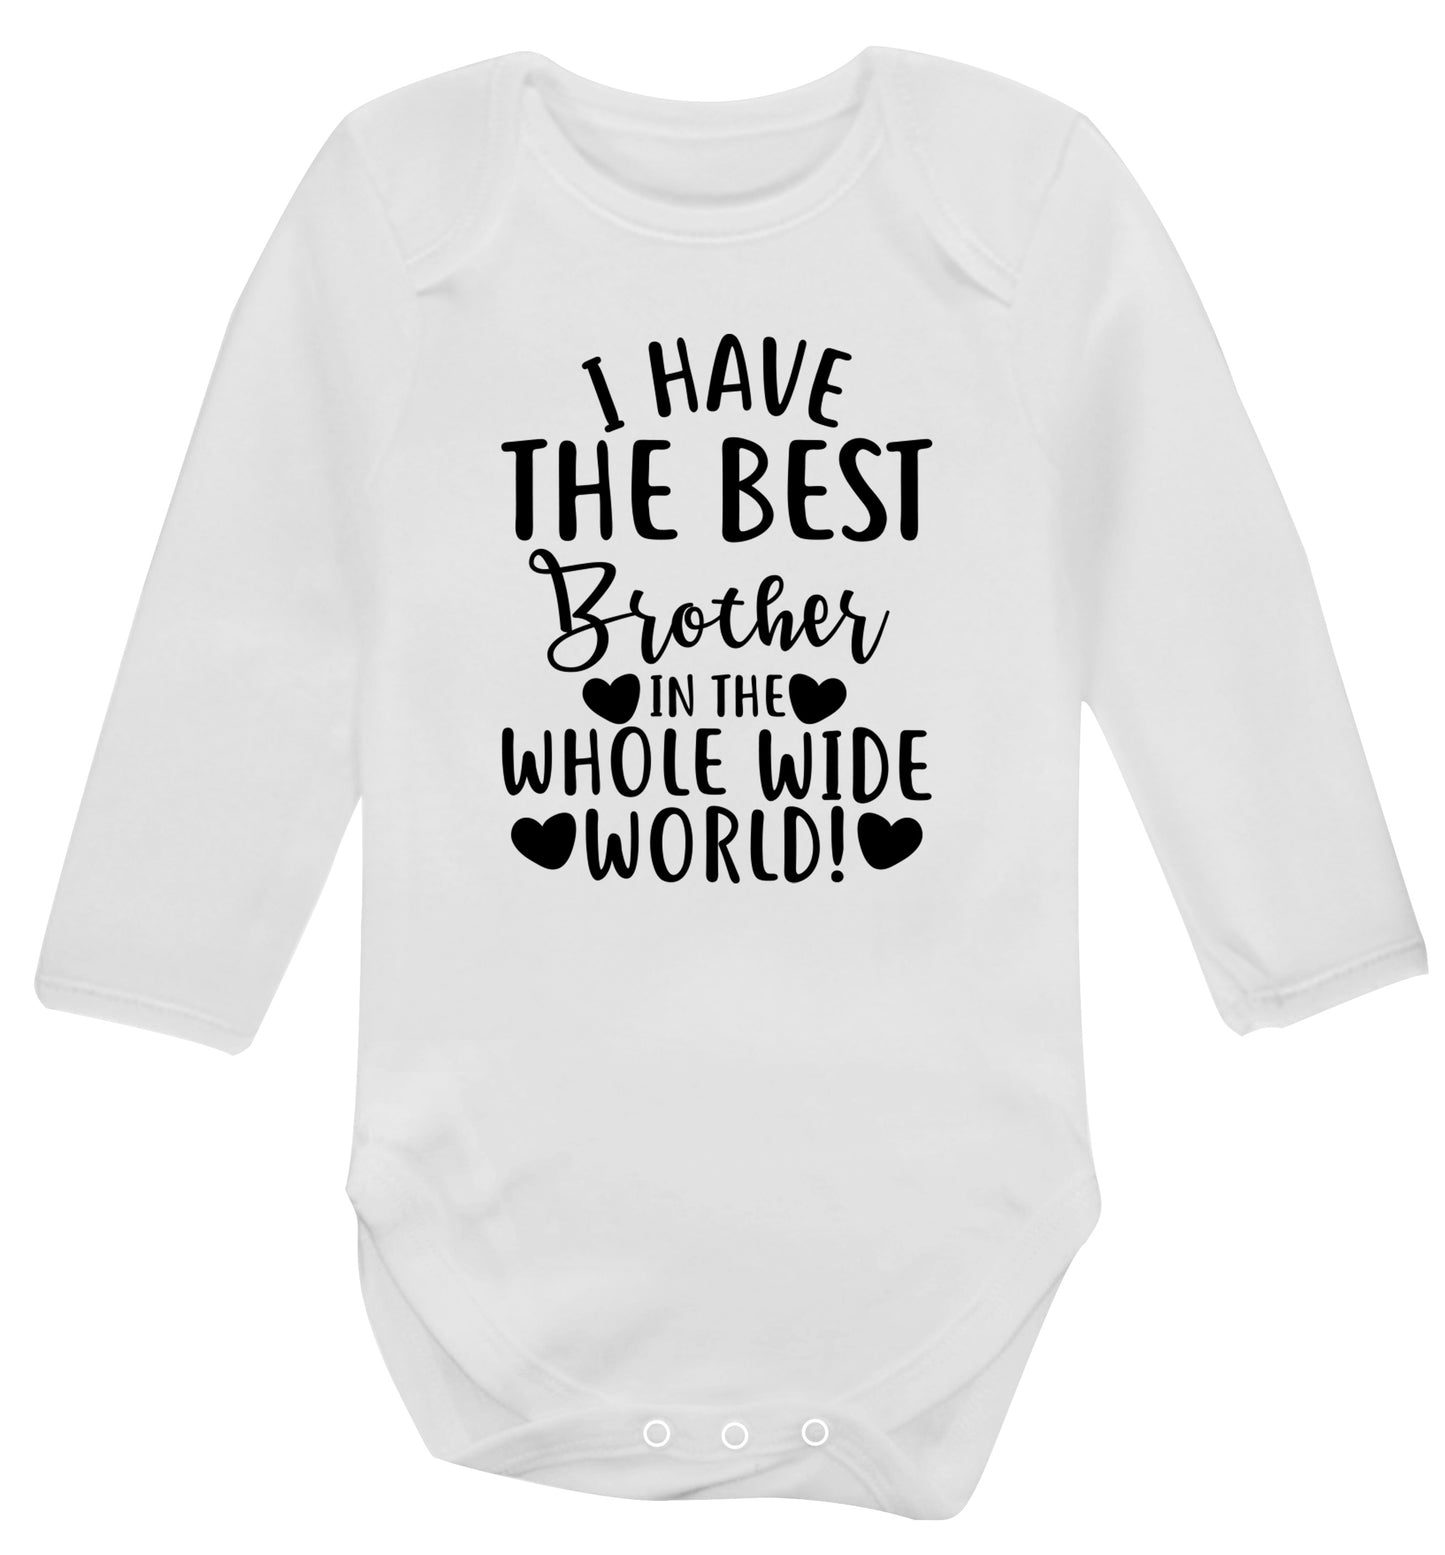 I have the best brother in the whole wide world! Baby Vest long sleeved white 6-12 months